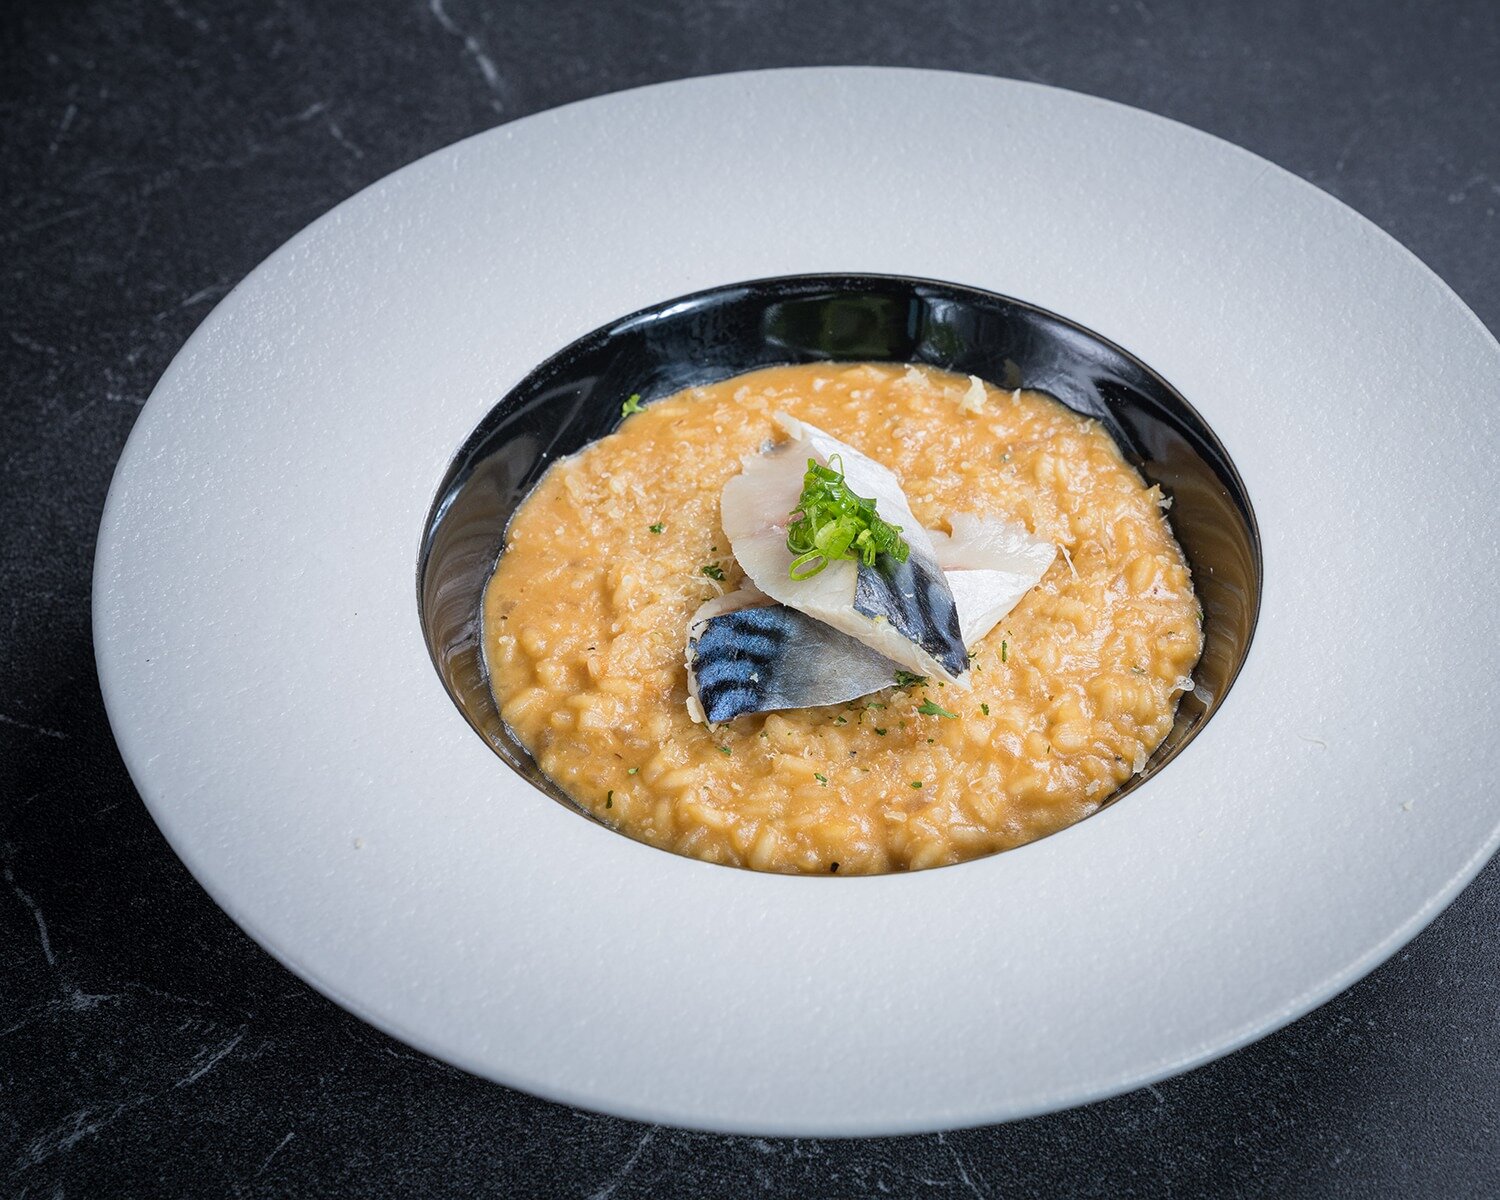 Miso Risotto with Mackerel. 

Combination of a creamy risotto, and rich and flavorful taste of mackerel fish infused with the umami goodness of miso is a comfort food for any night of the week.